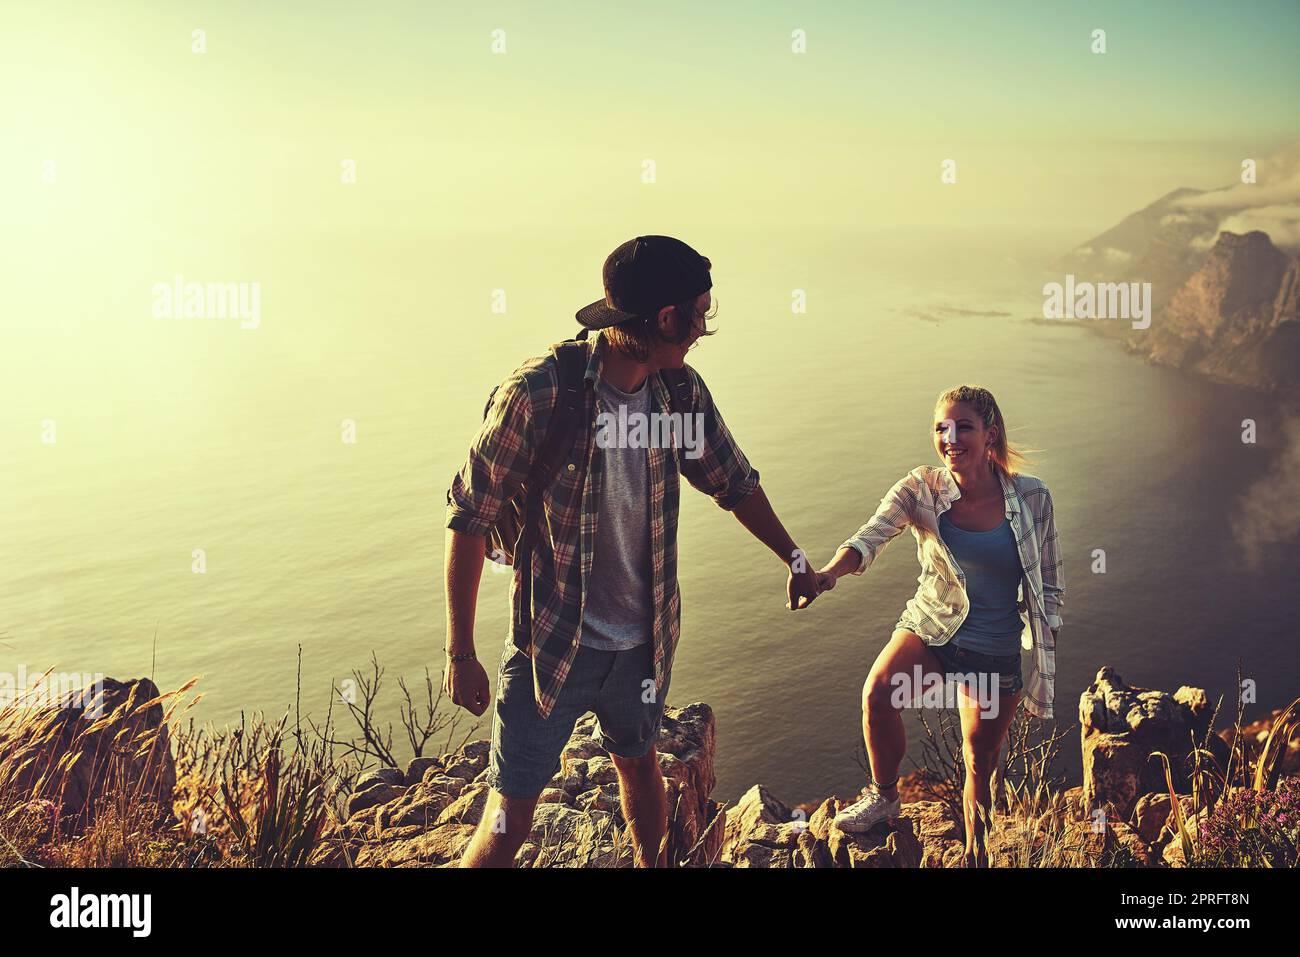 Theyve got a double case of wanderlust. an affectionate young couple bonding while out on a hike together. Stock Photo